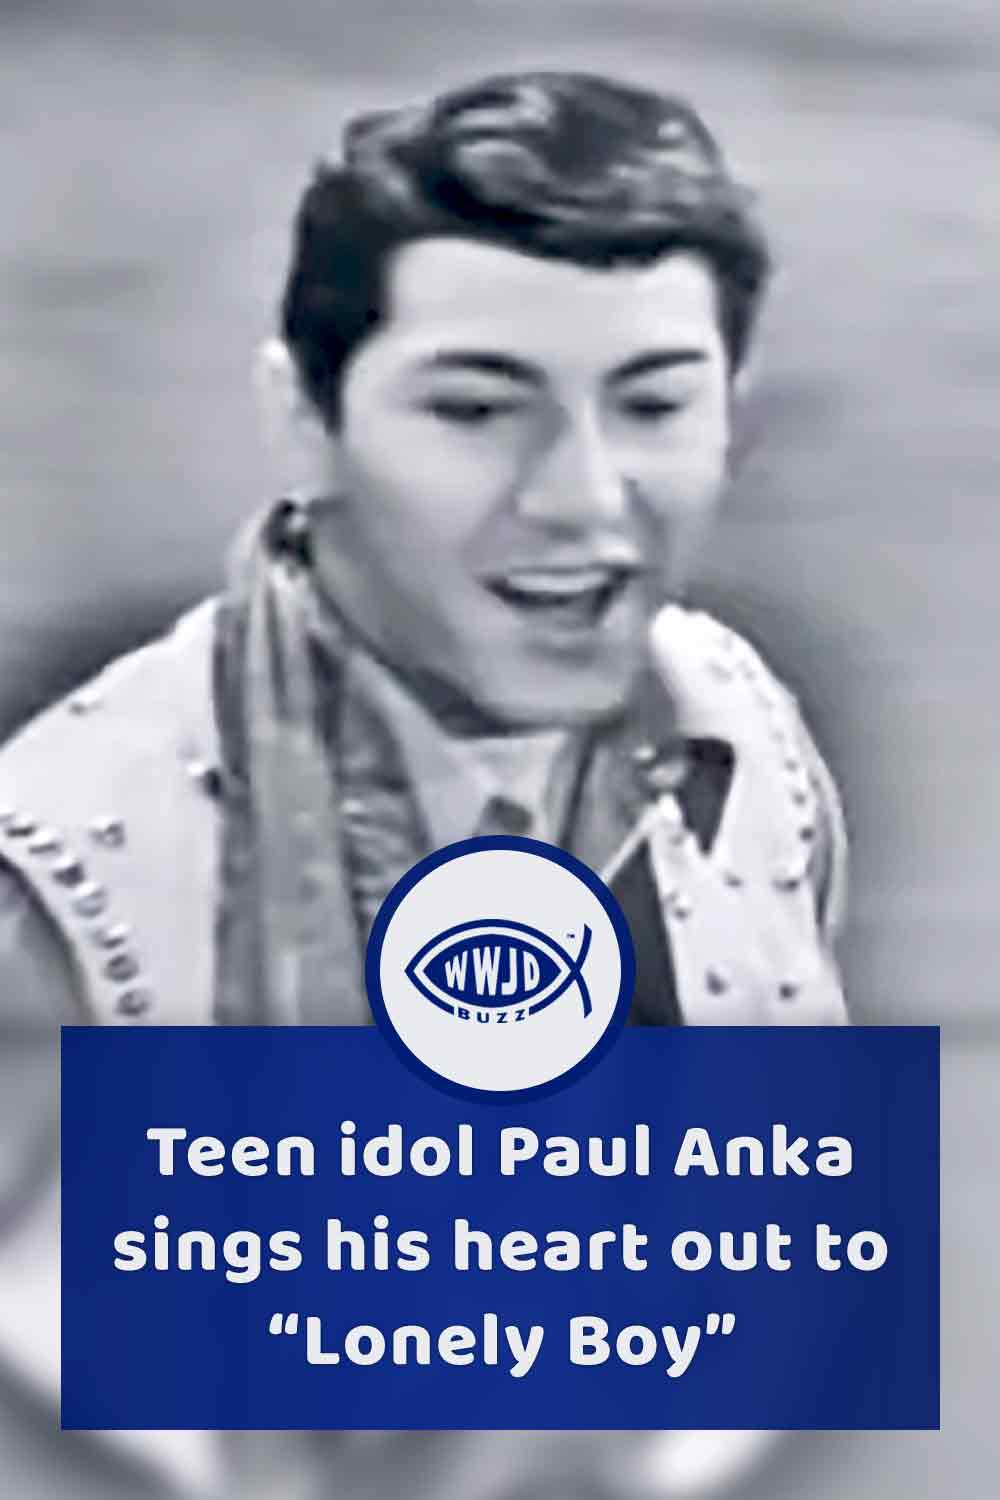 Teen idol Paul Anka sings his heart out to “Lonely Boy”